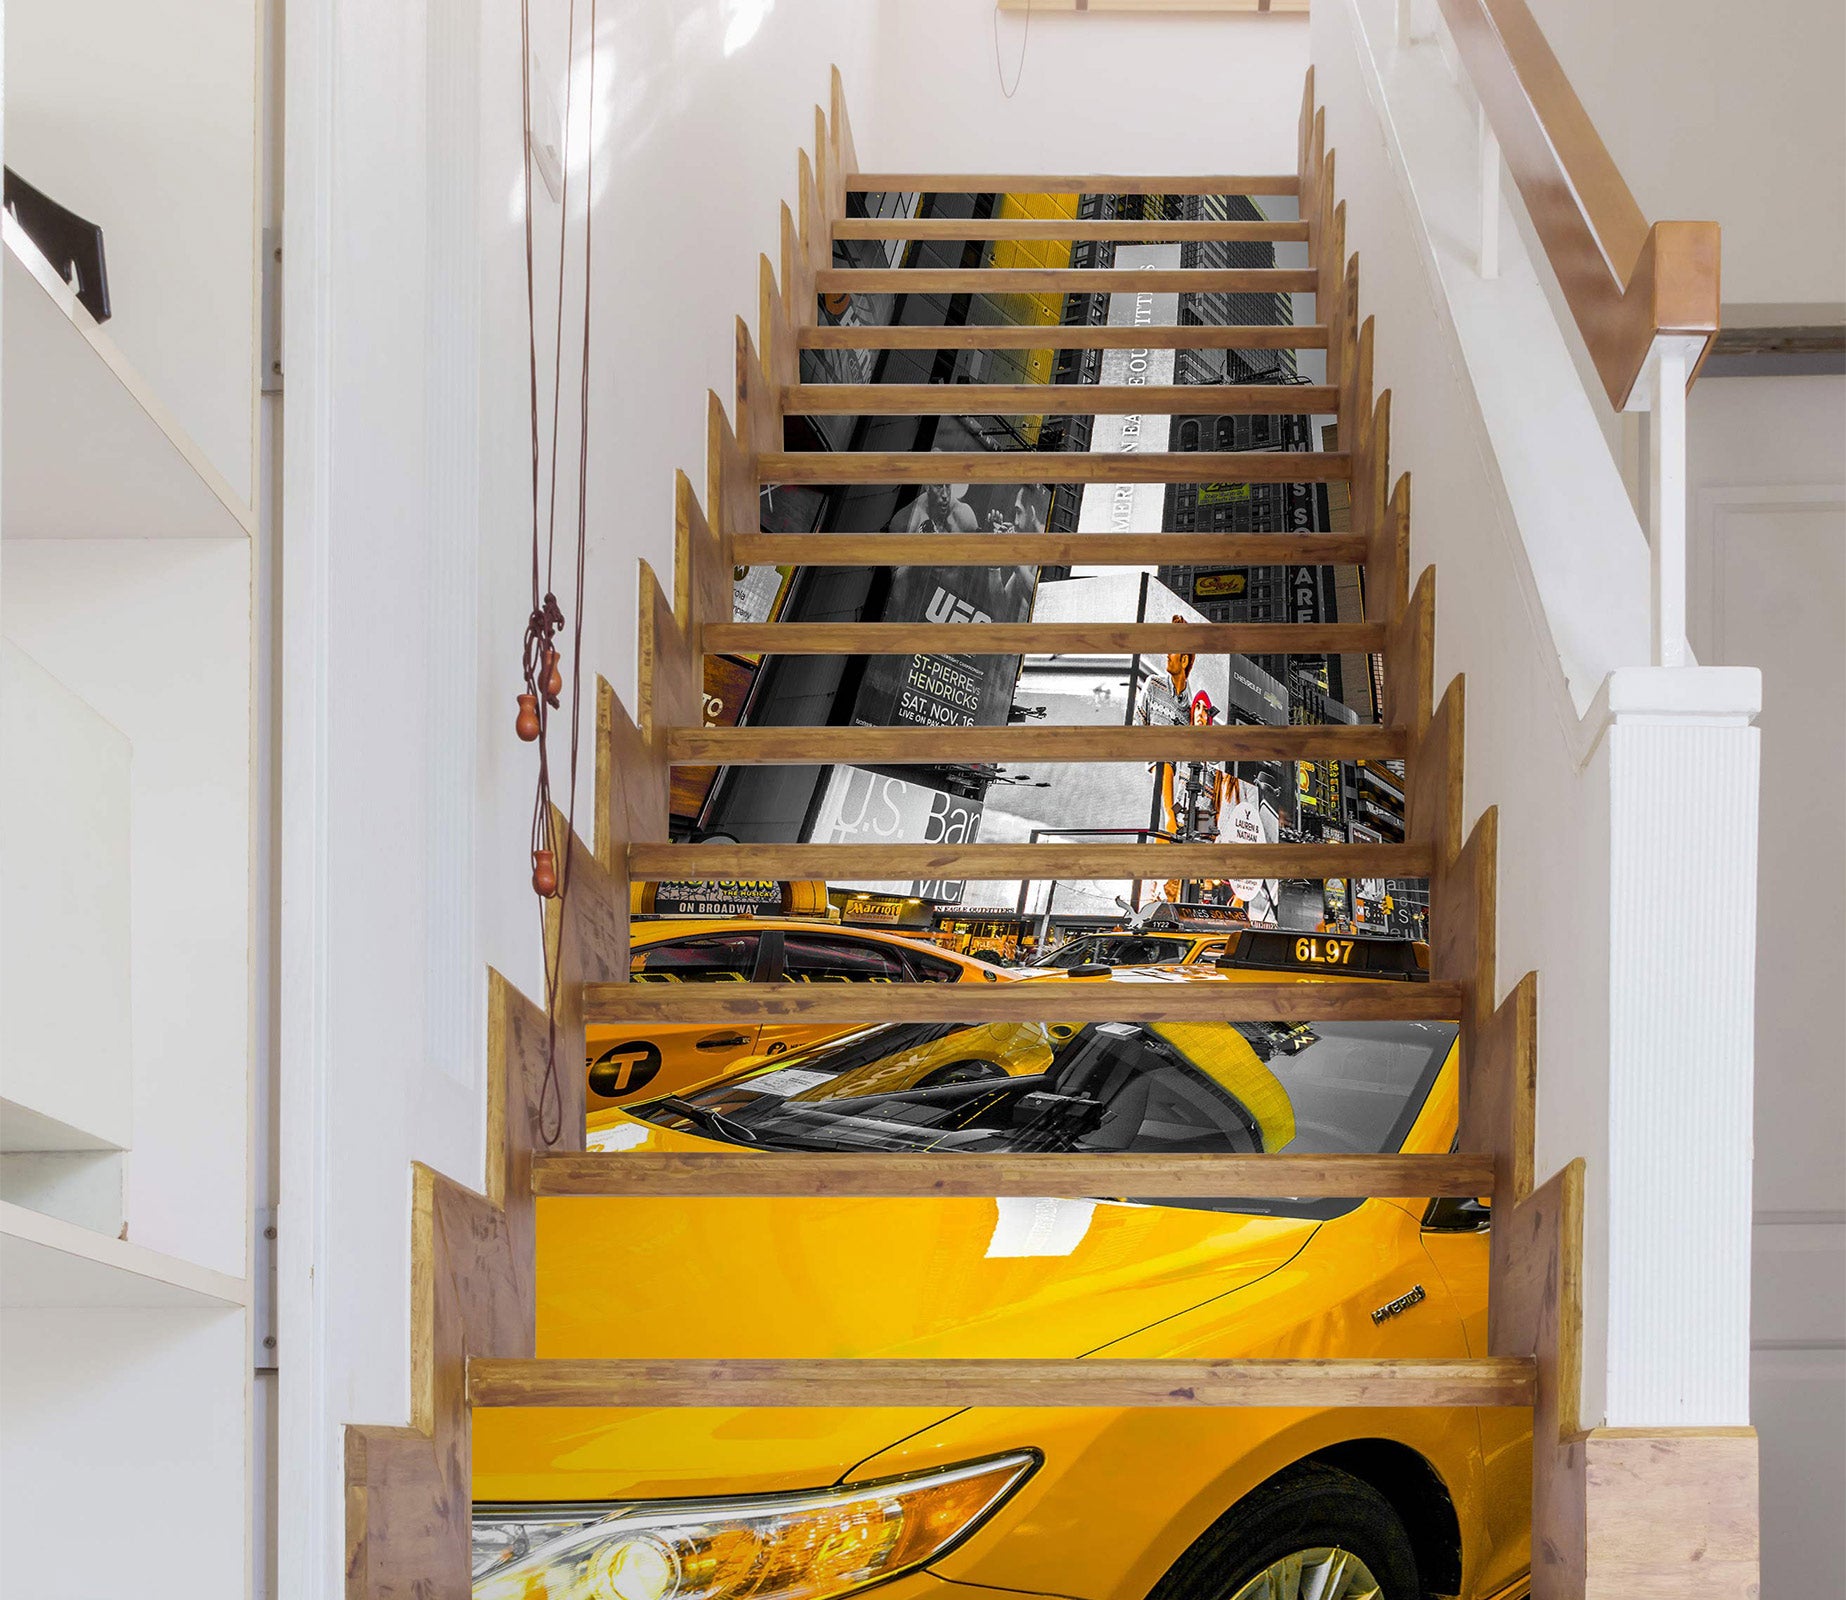 3D Yellow Vehicle 9992 Assaf Frank Stair Risers